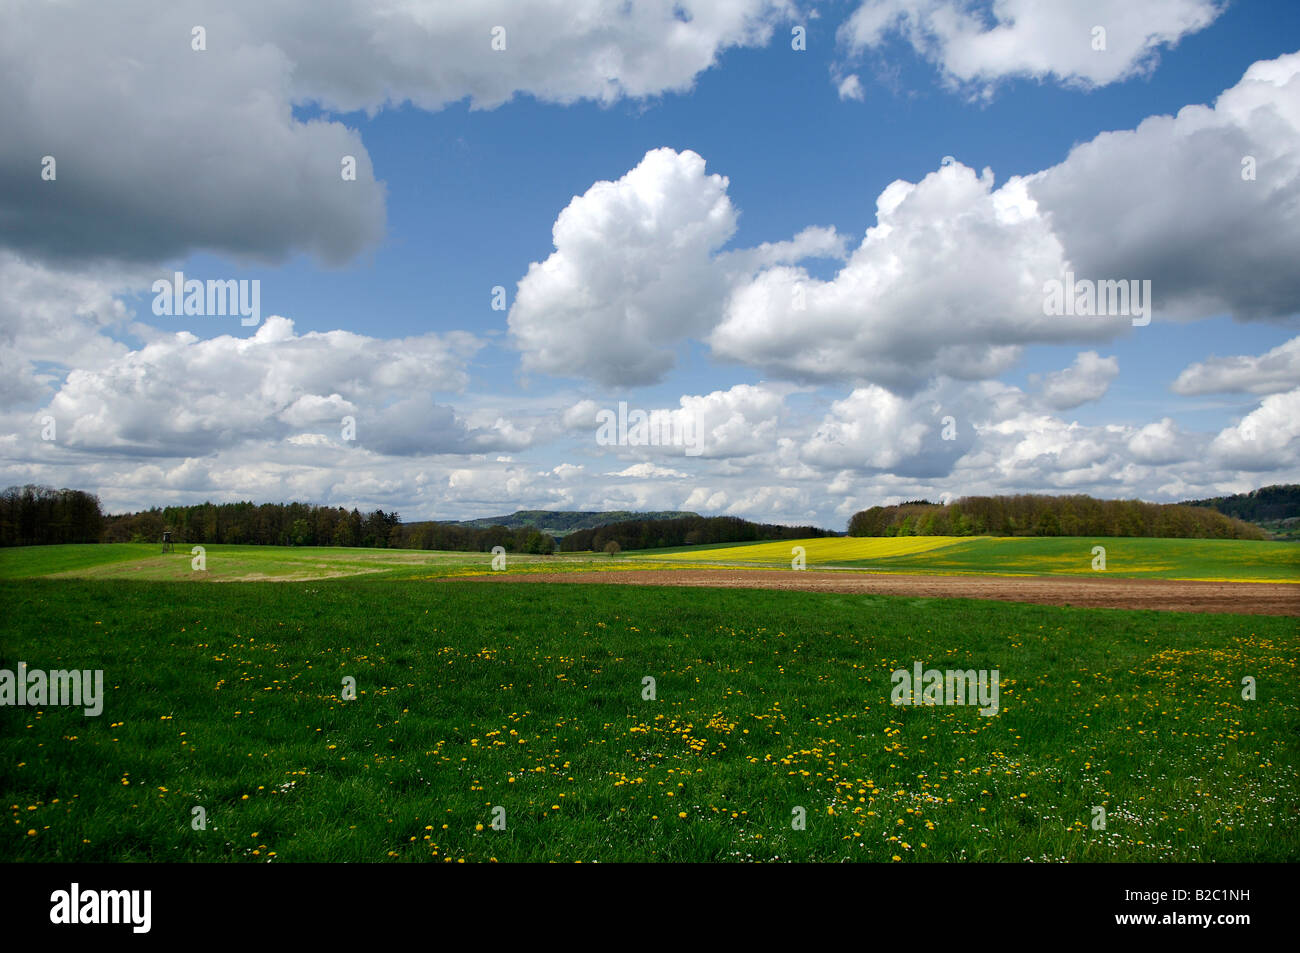 Franconian country side, Herpersdorf, Middle Franconia, Bavaria, Germany, Europe Stock Photo